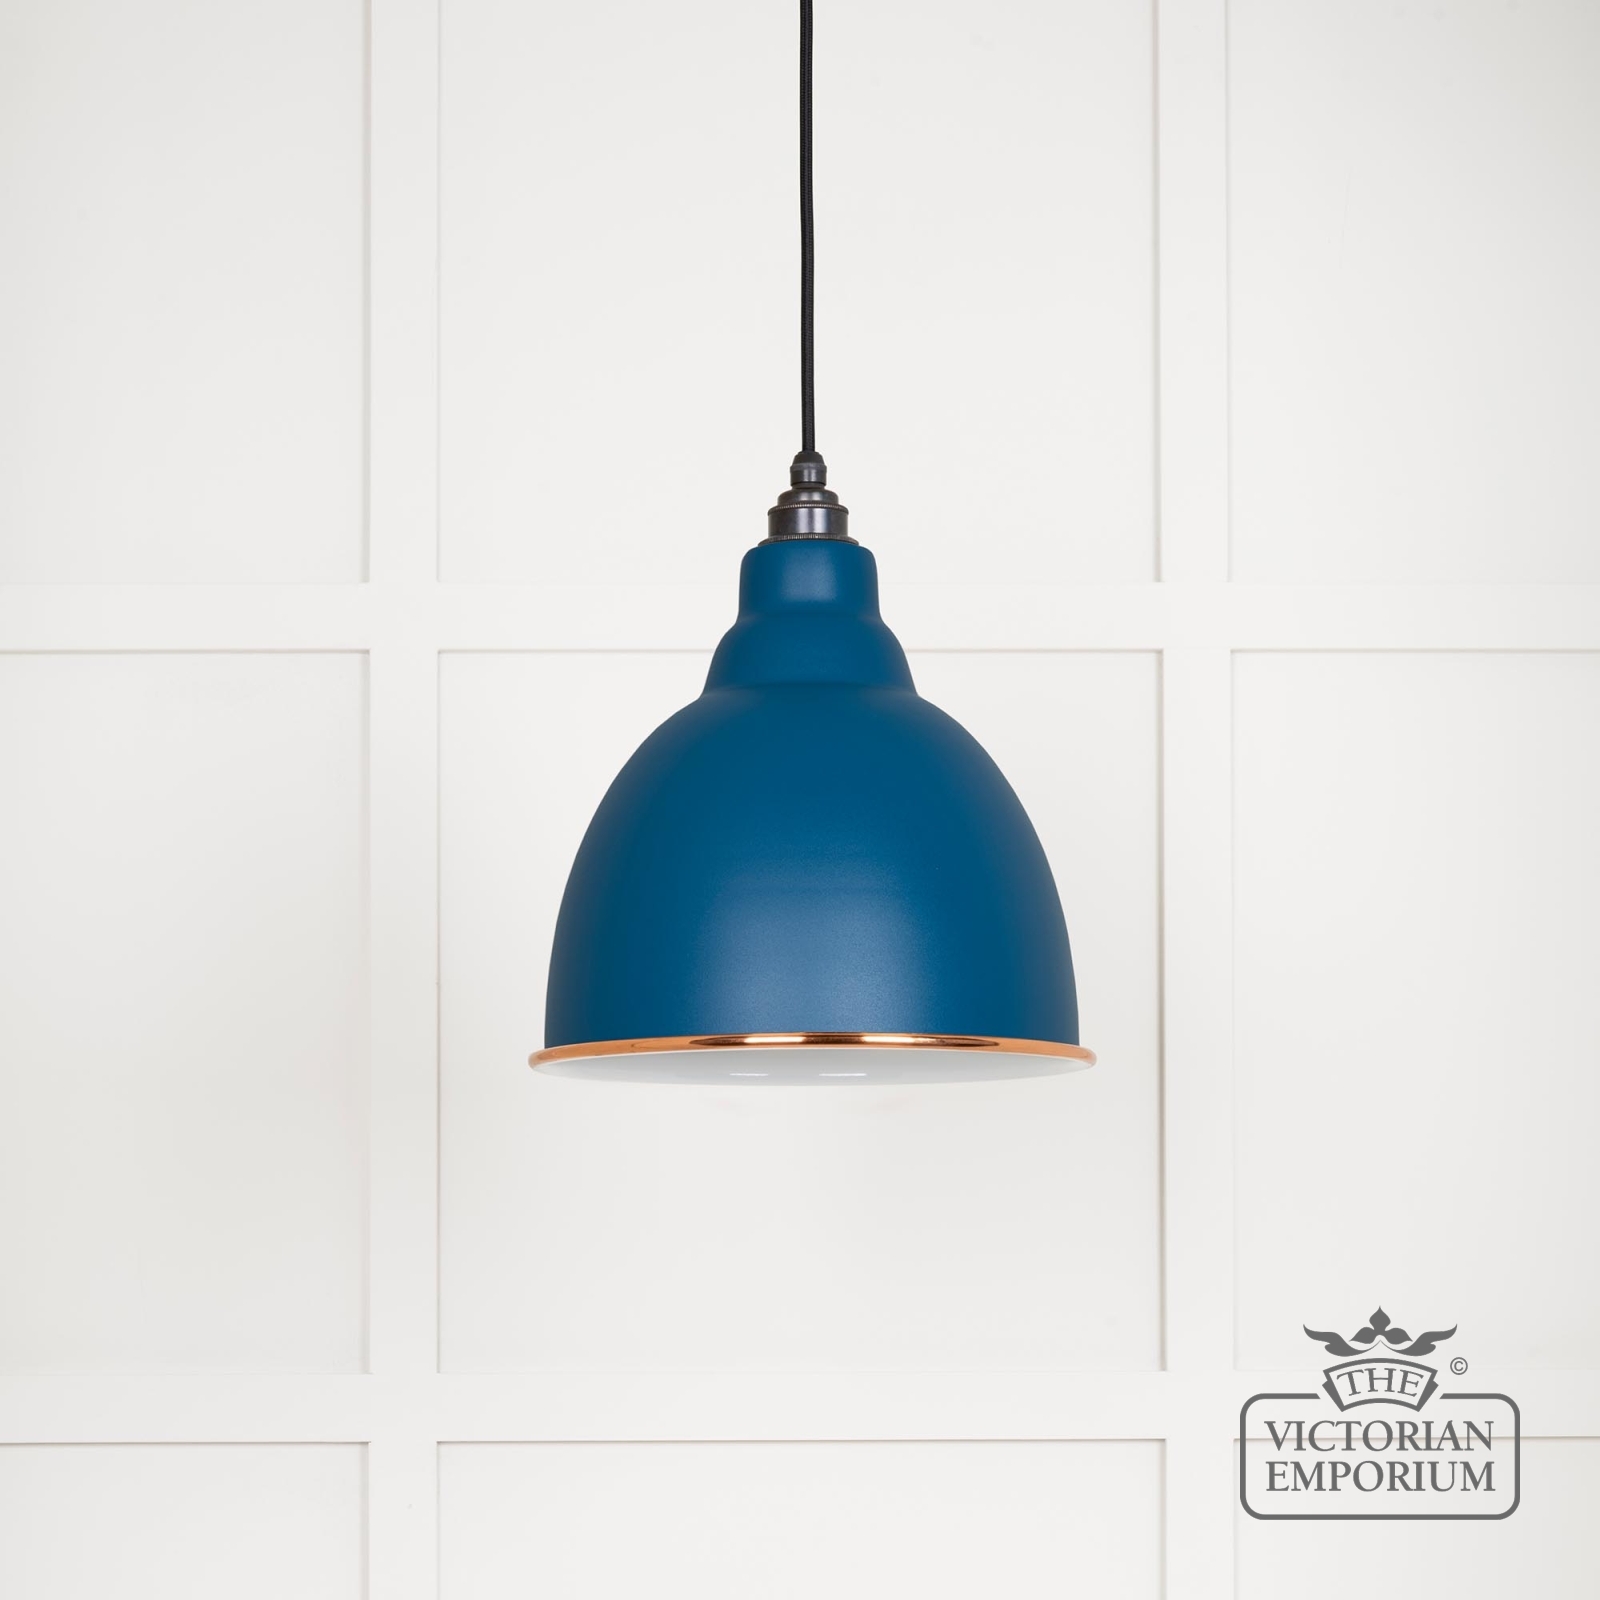 Brindle pendant light in Upstream with white gloss interior